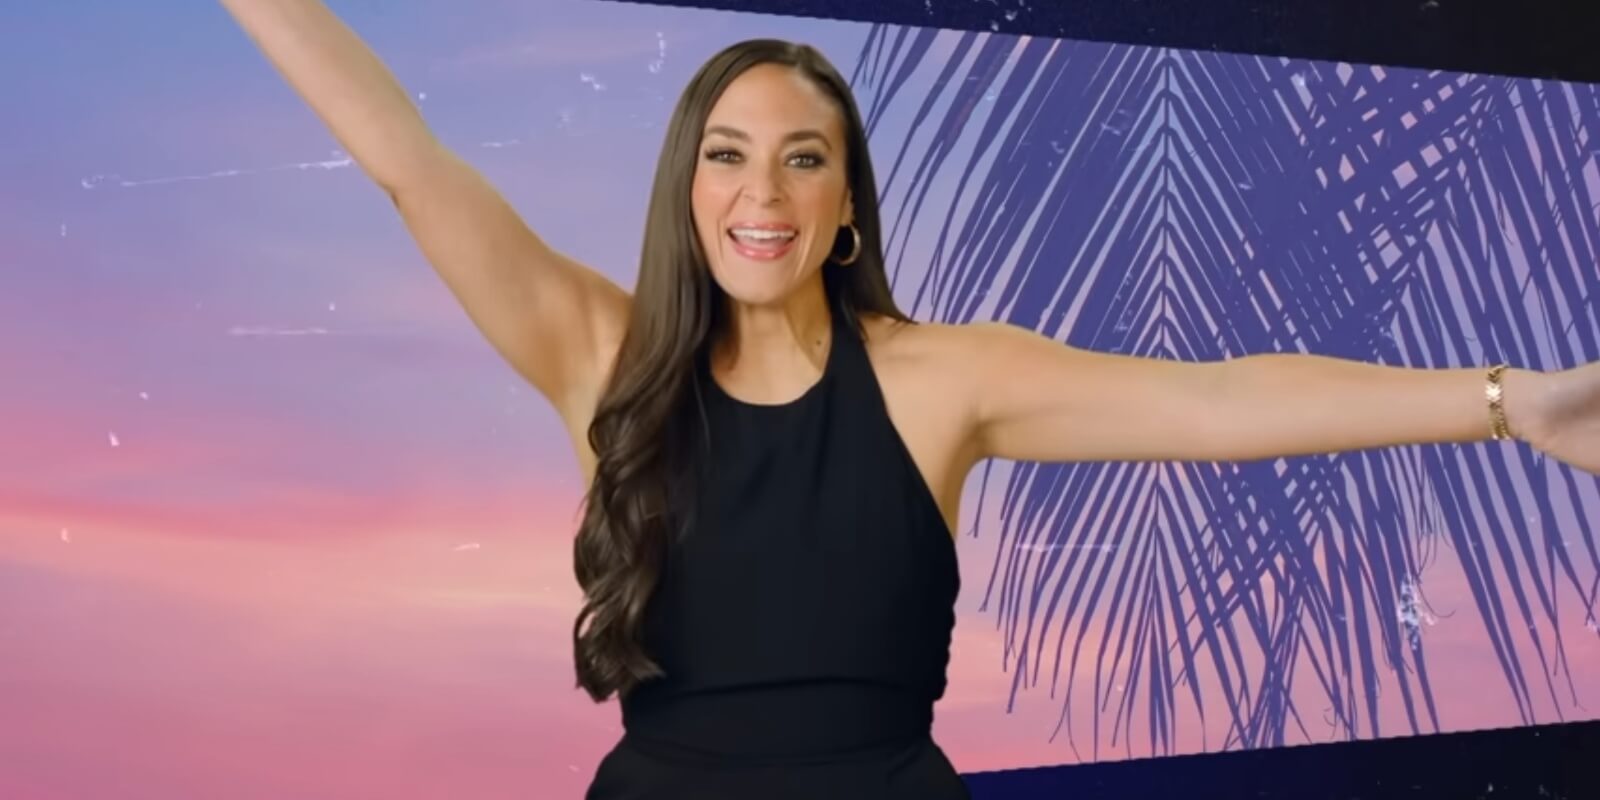 Sammi Giancola appears in a teaser trailer for 'Jersey Shore: Family Vacation' season 7 on MTV.